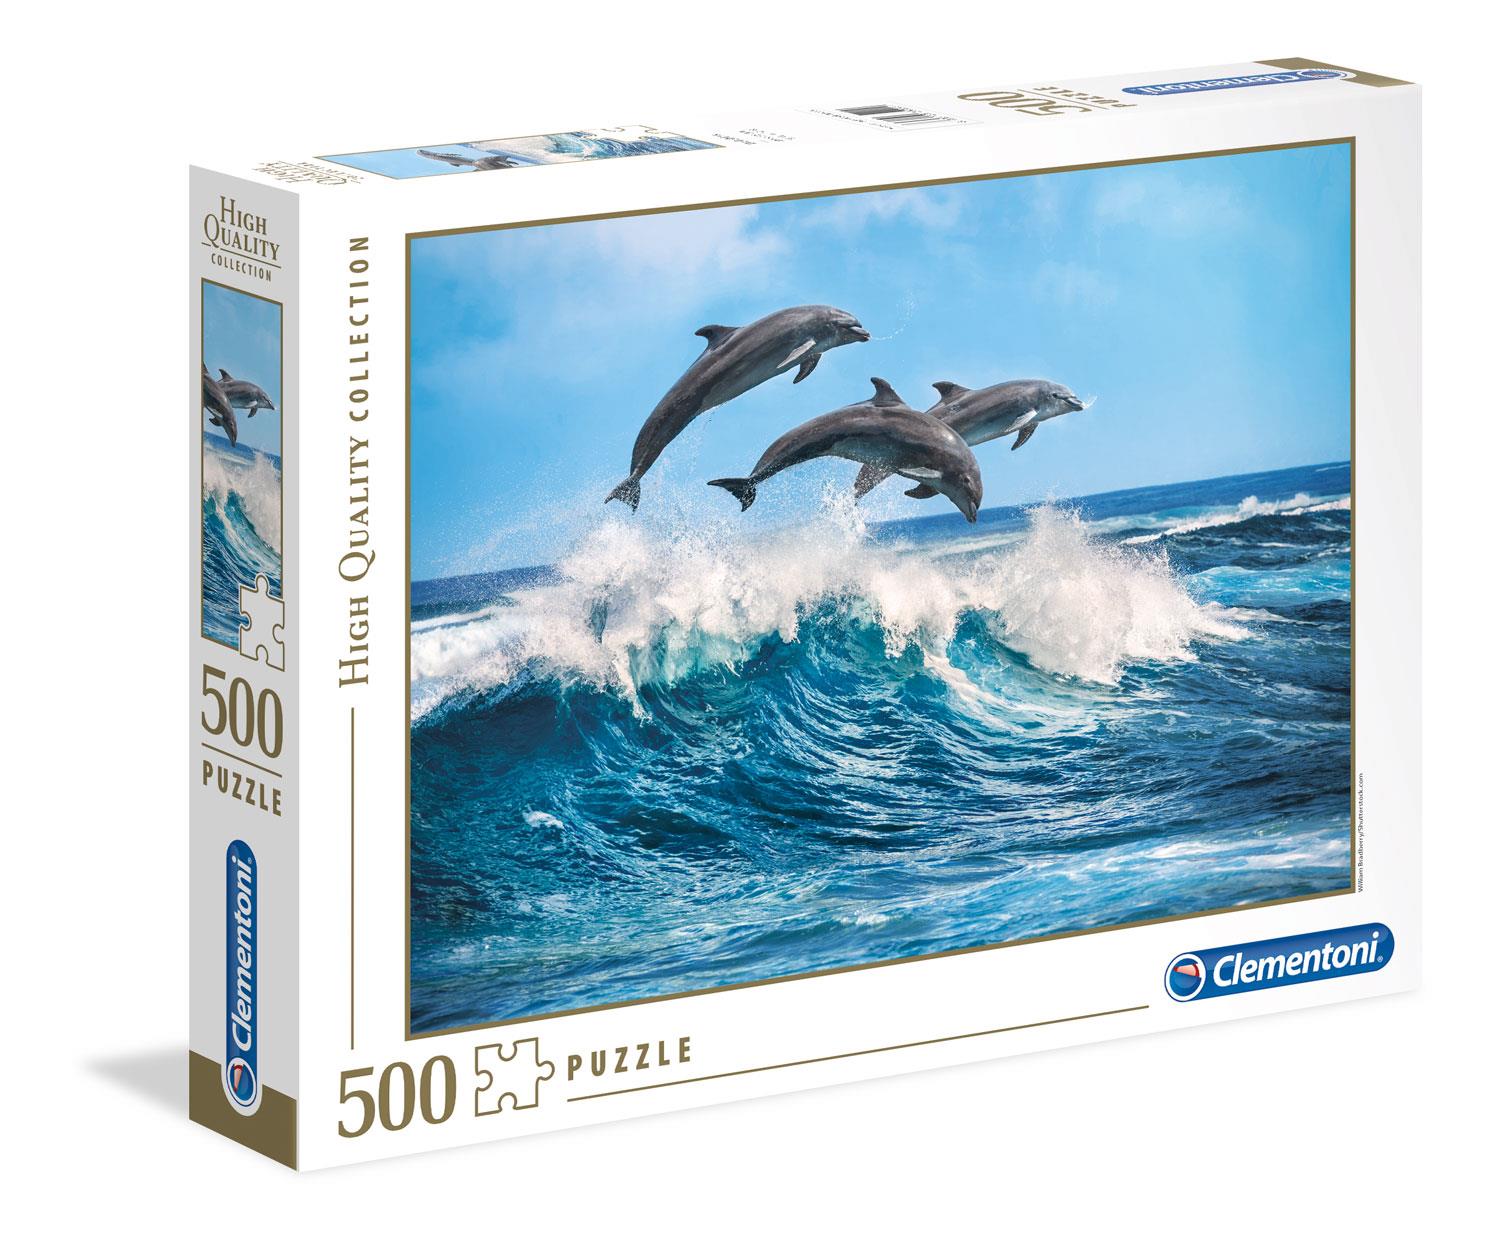 Clementoni Dolphins High Quality Jigsaw Puzzle (500 Pieces)